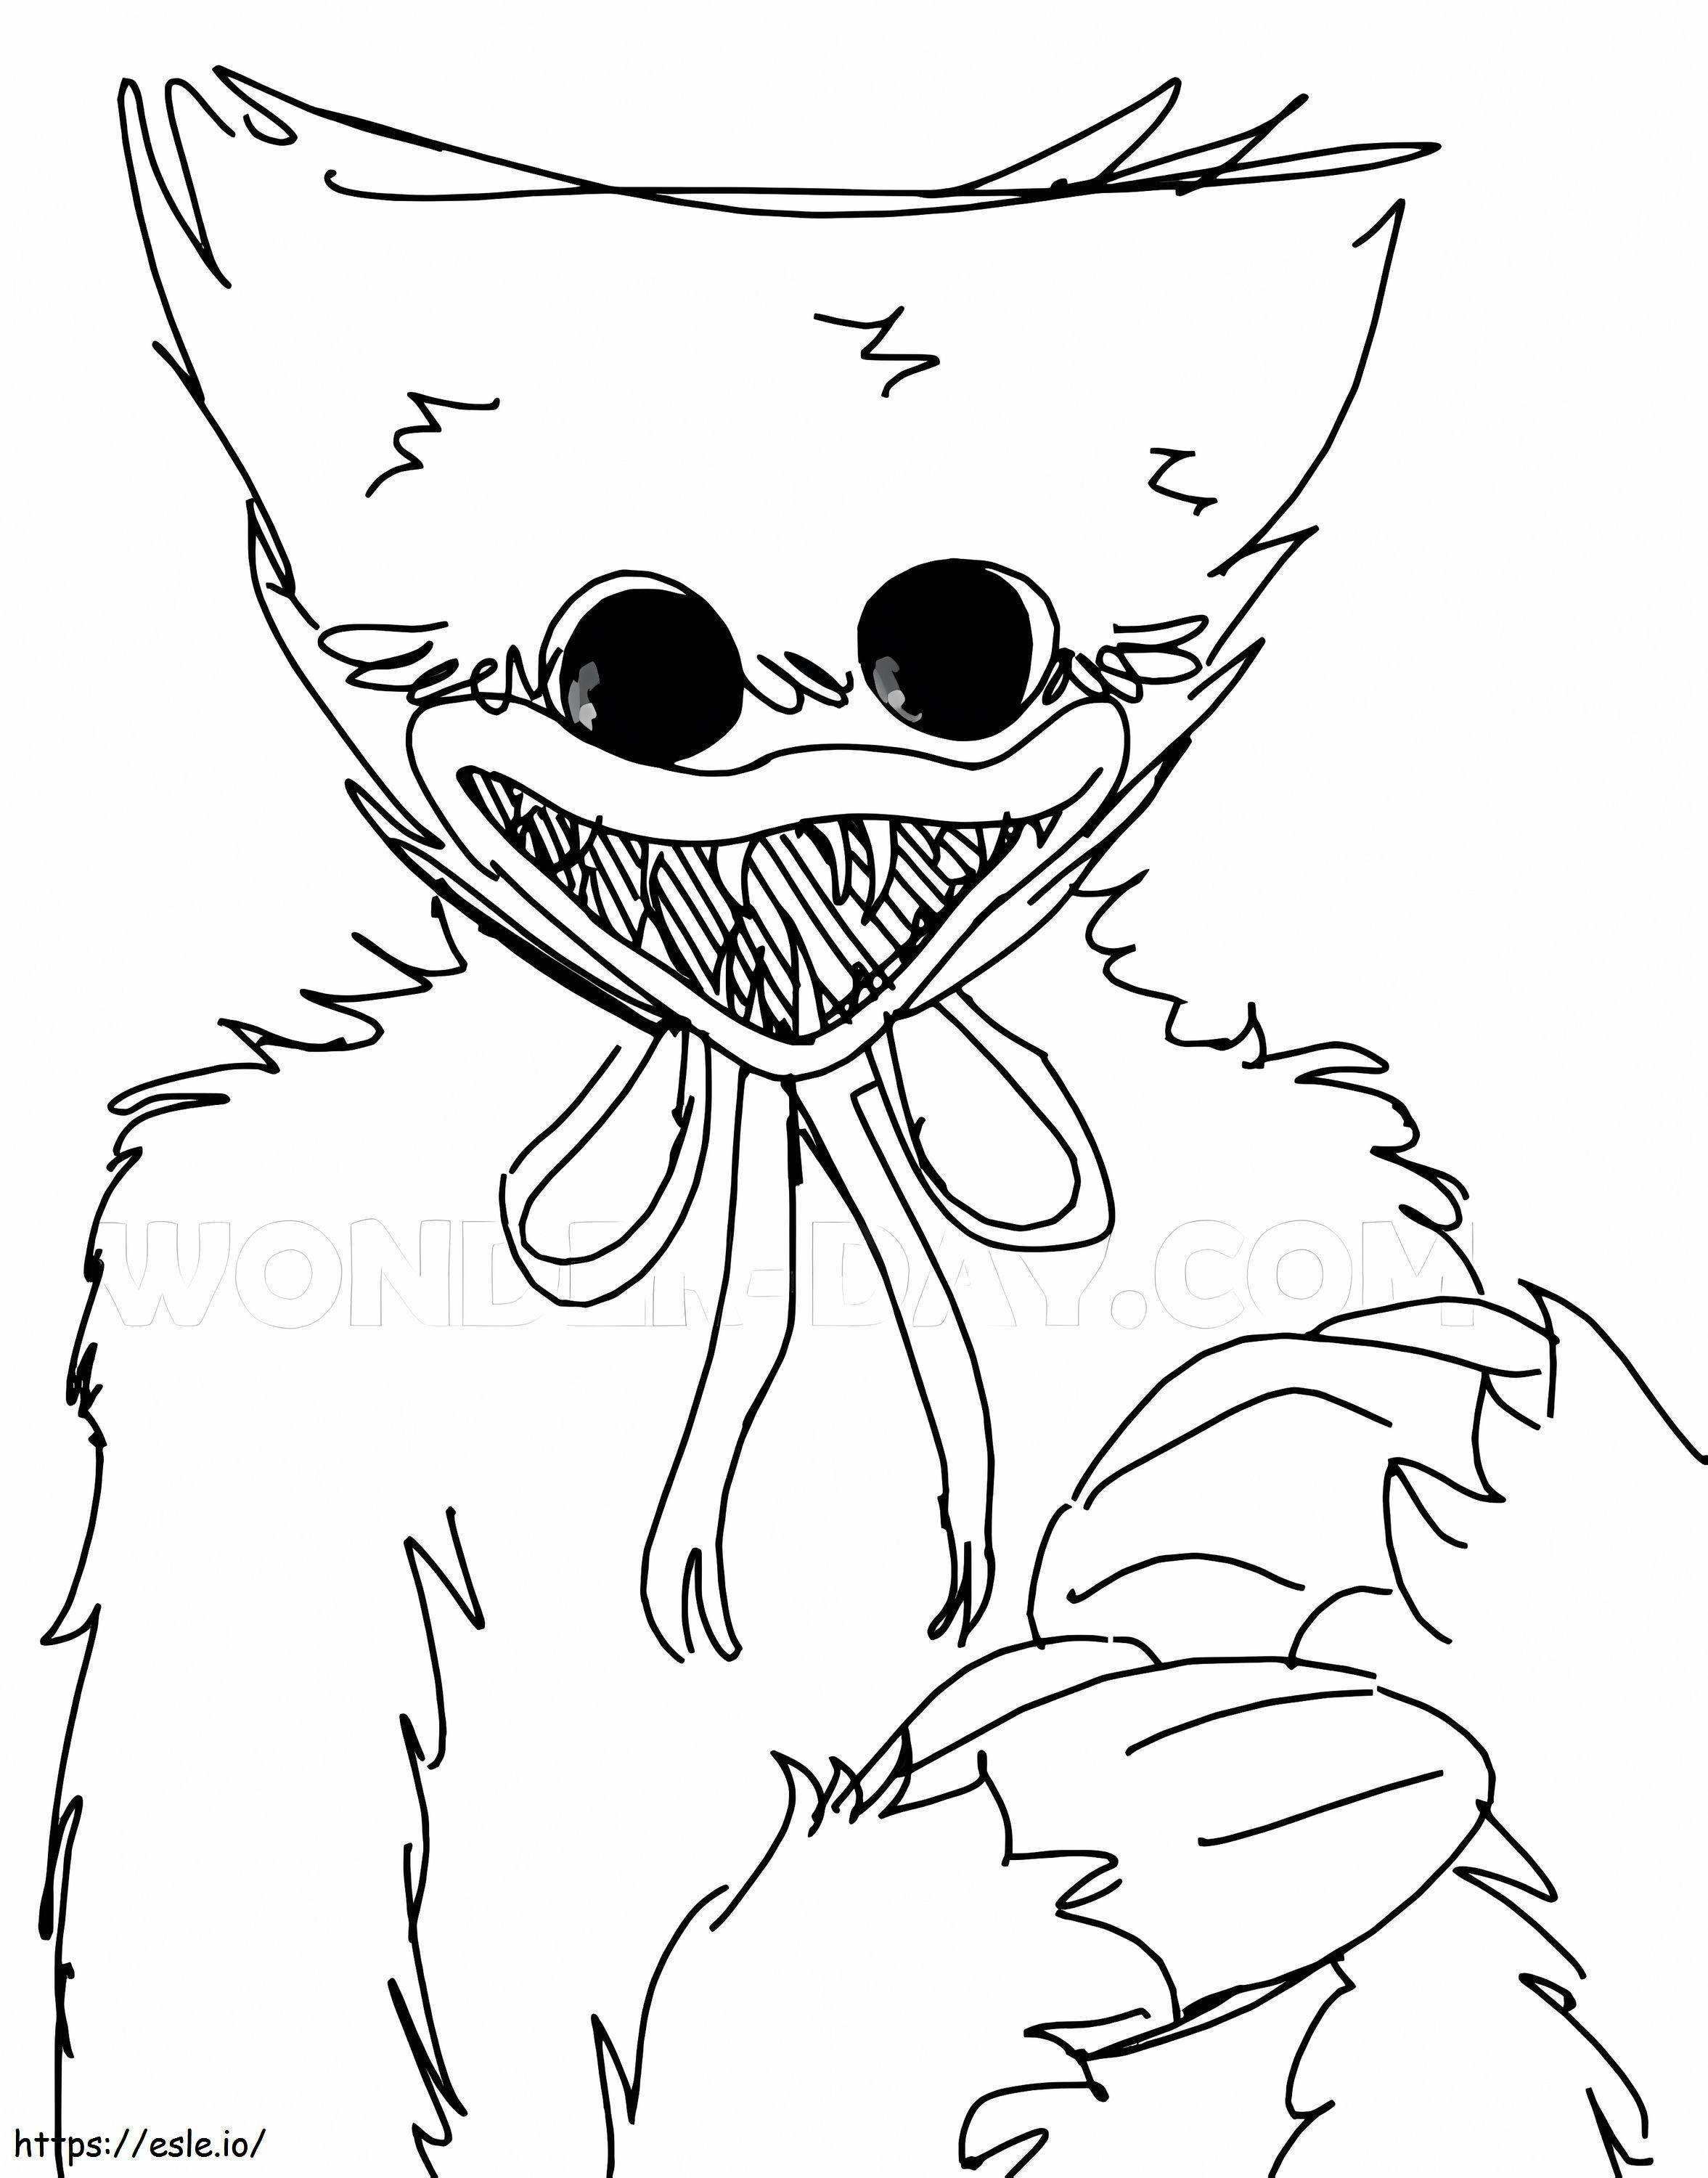 Huggy Wuggy 9 coloring page